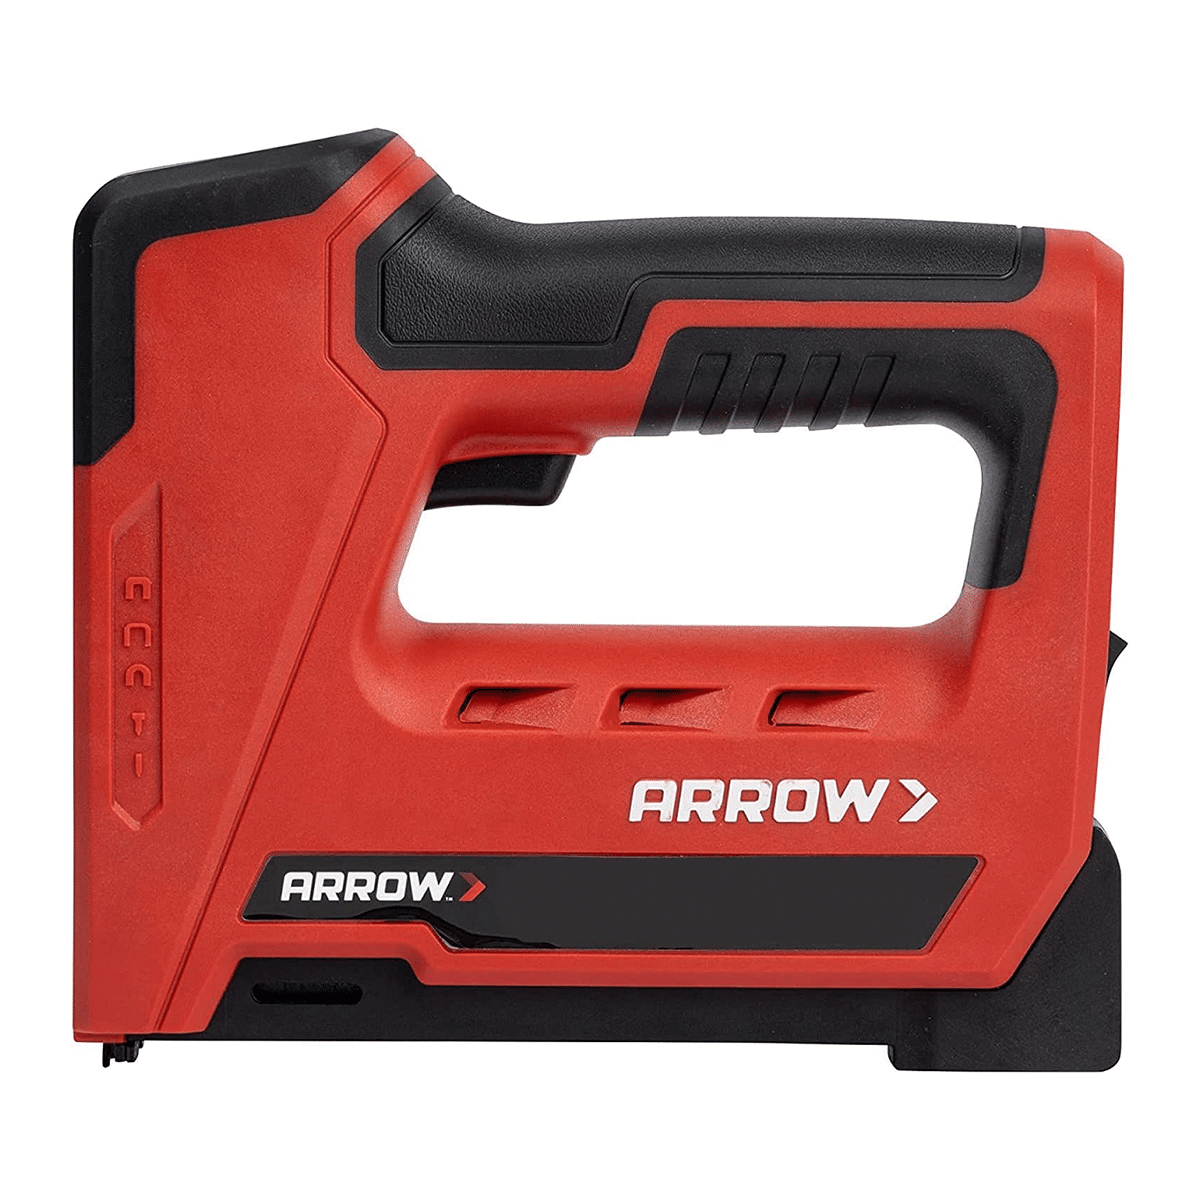 Milwaukee Second-Generation Cordless Brad Nailer Review - This Old House